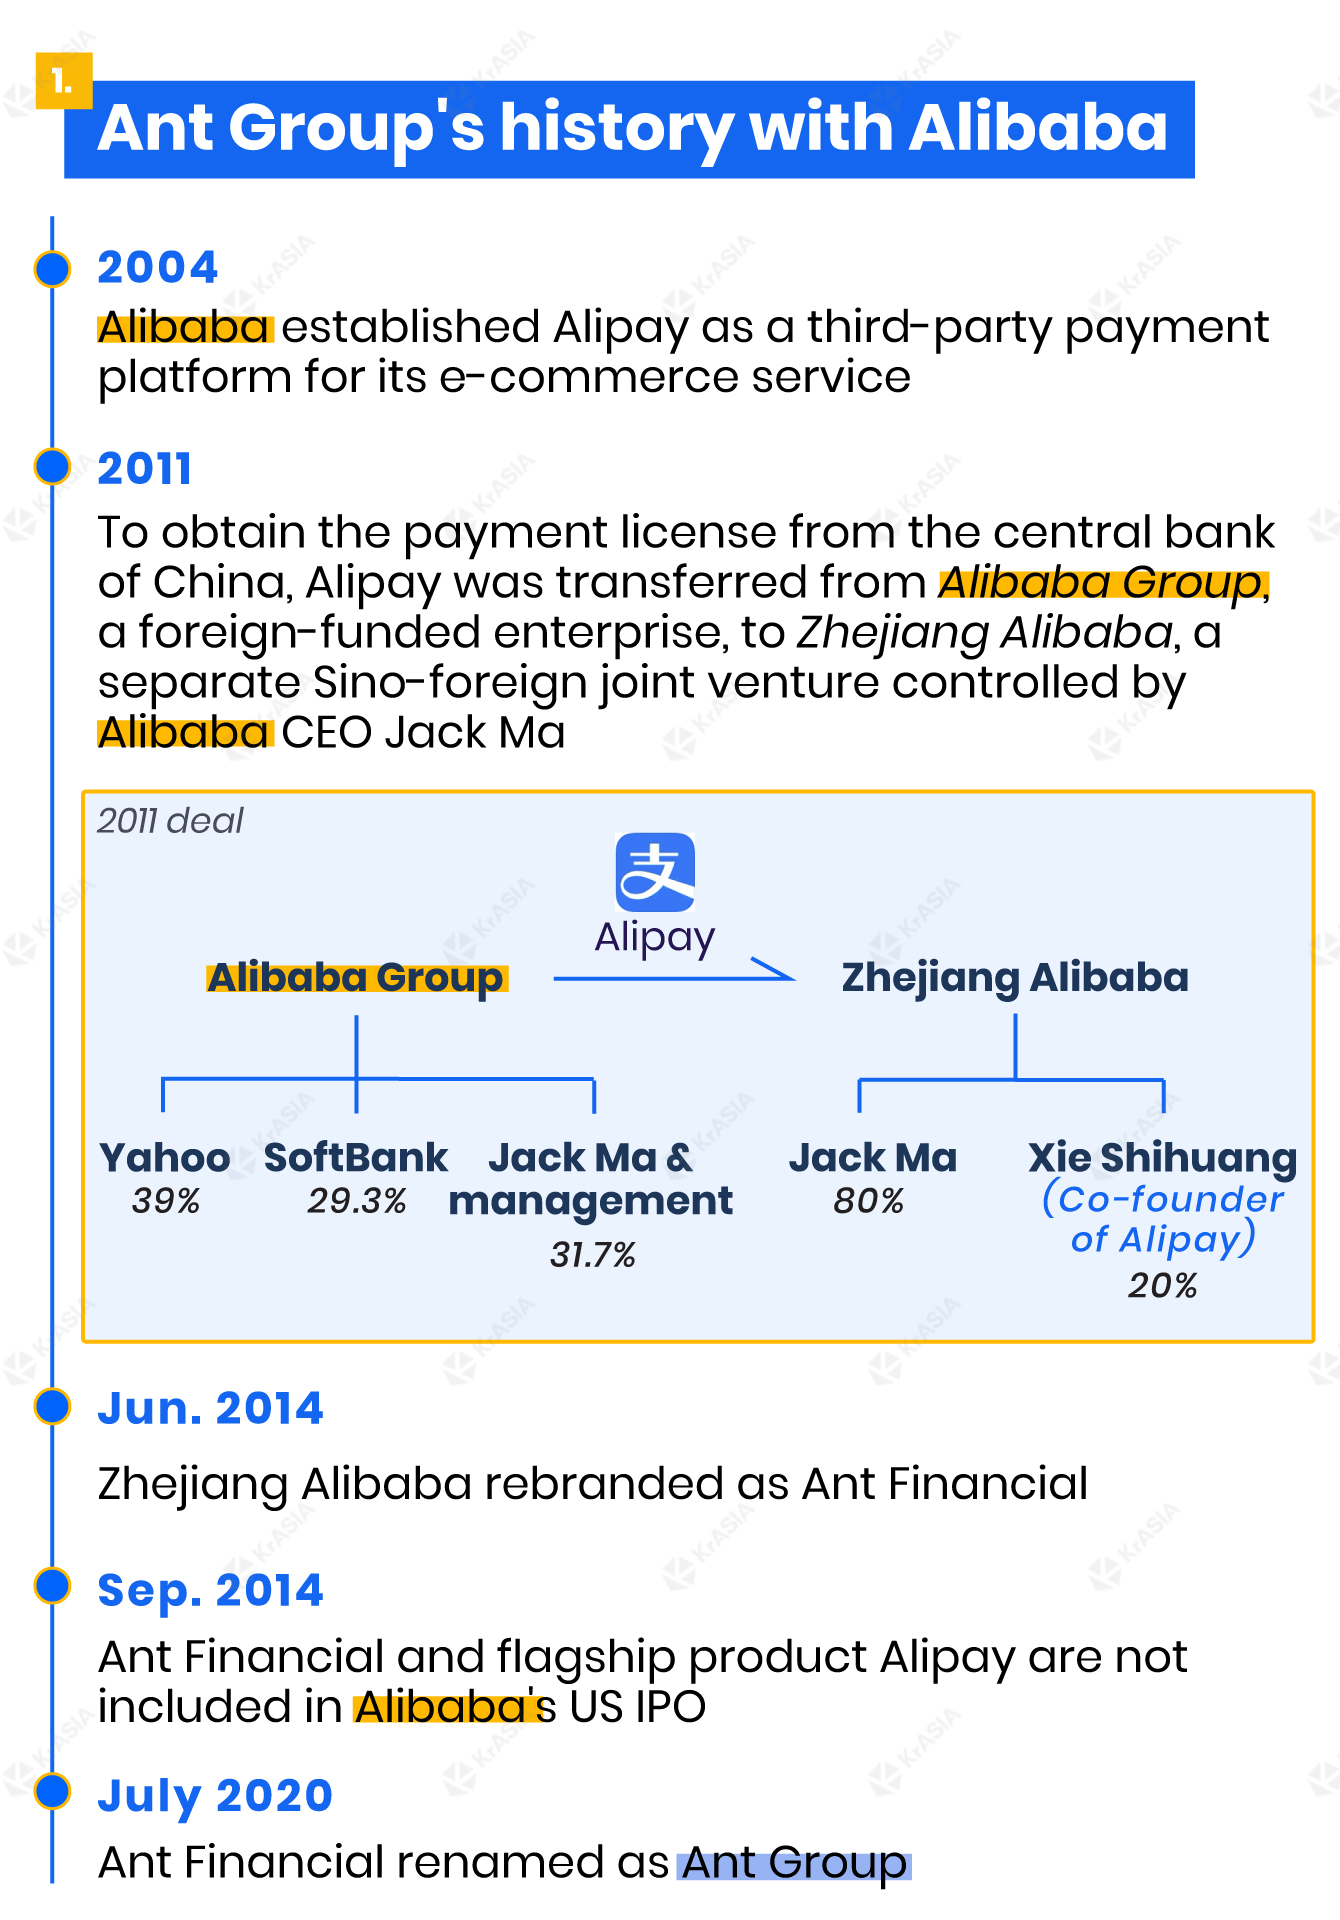 Ant Group_Alibaba_history_relationship